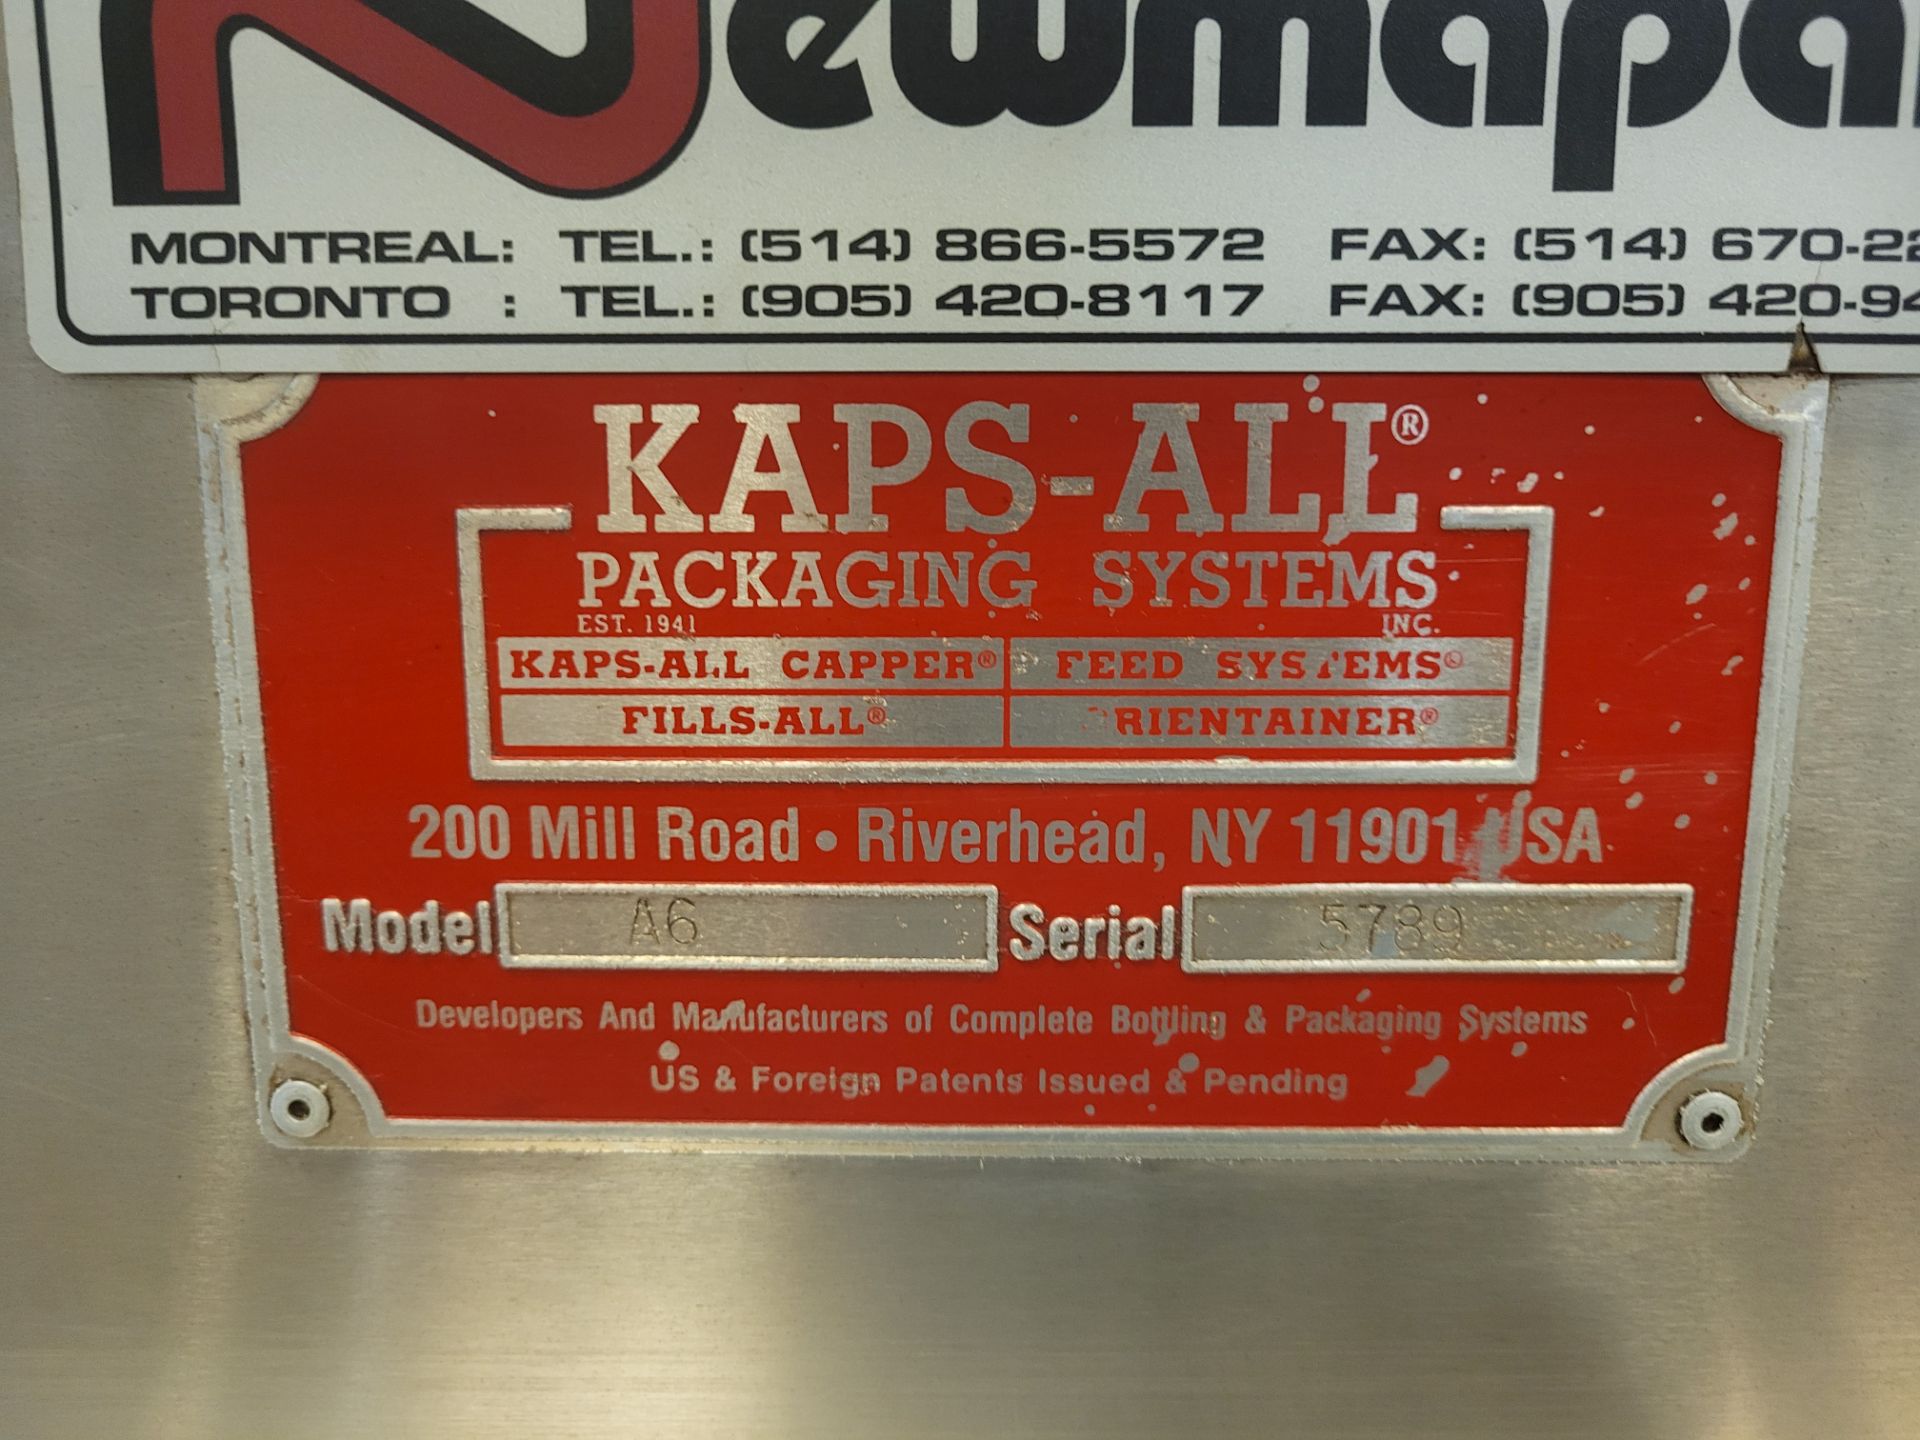 KAPS-ALL A6 6-Spindle Auto-Capper, ser. 5789, with KAPS-ALL cap feeder/elevator and motorized convey - Image 8 of 19